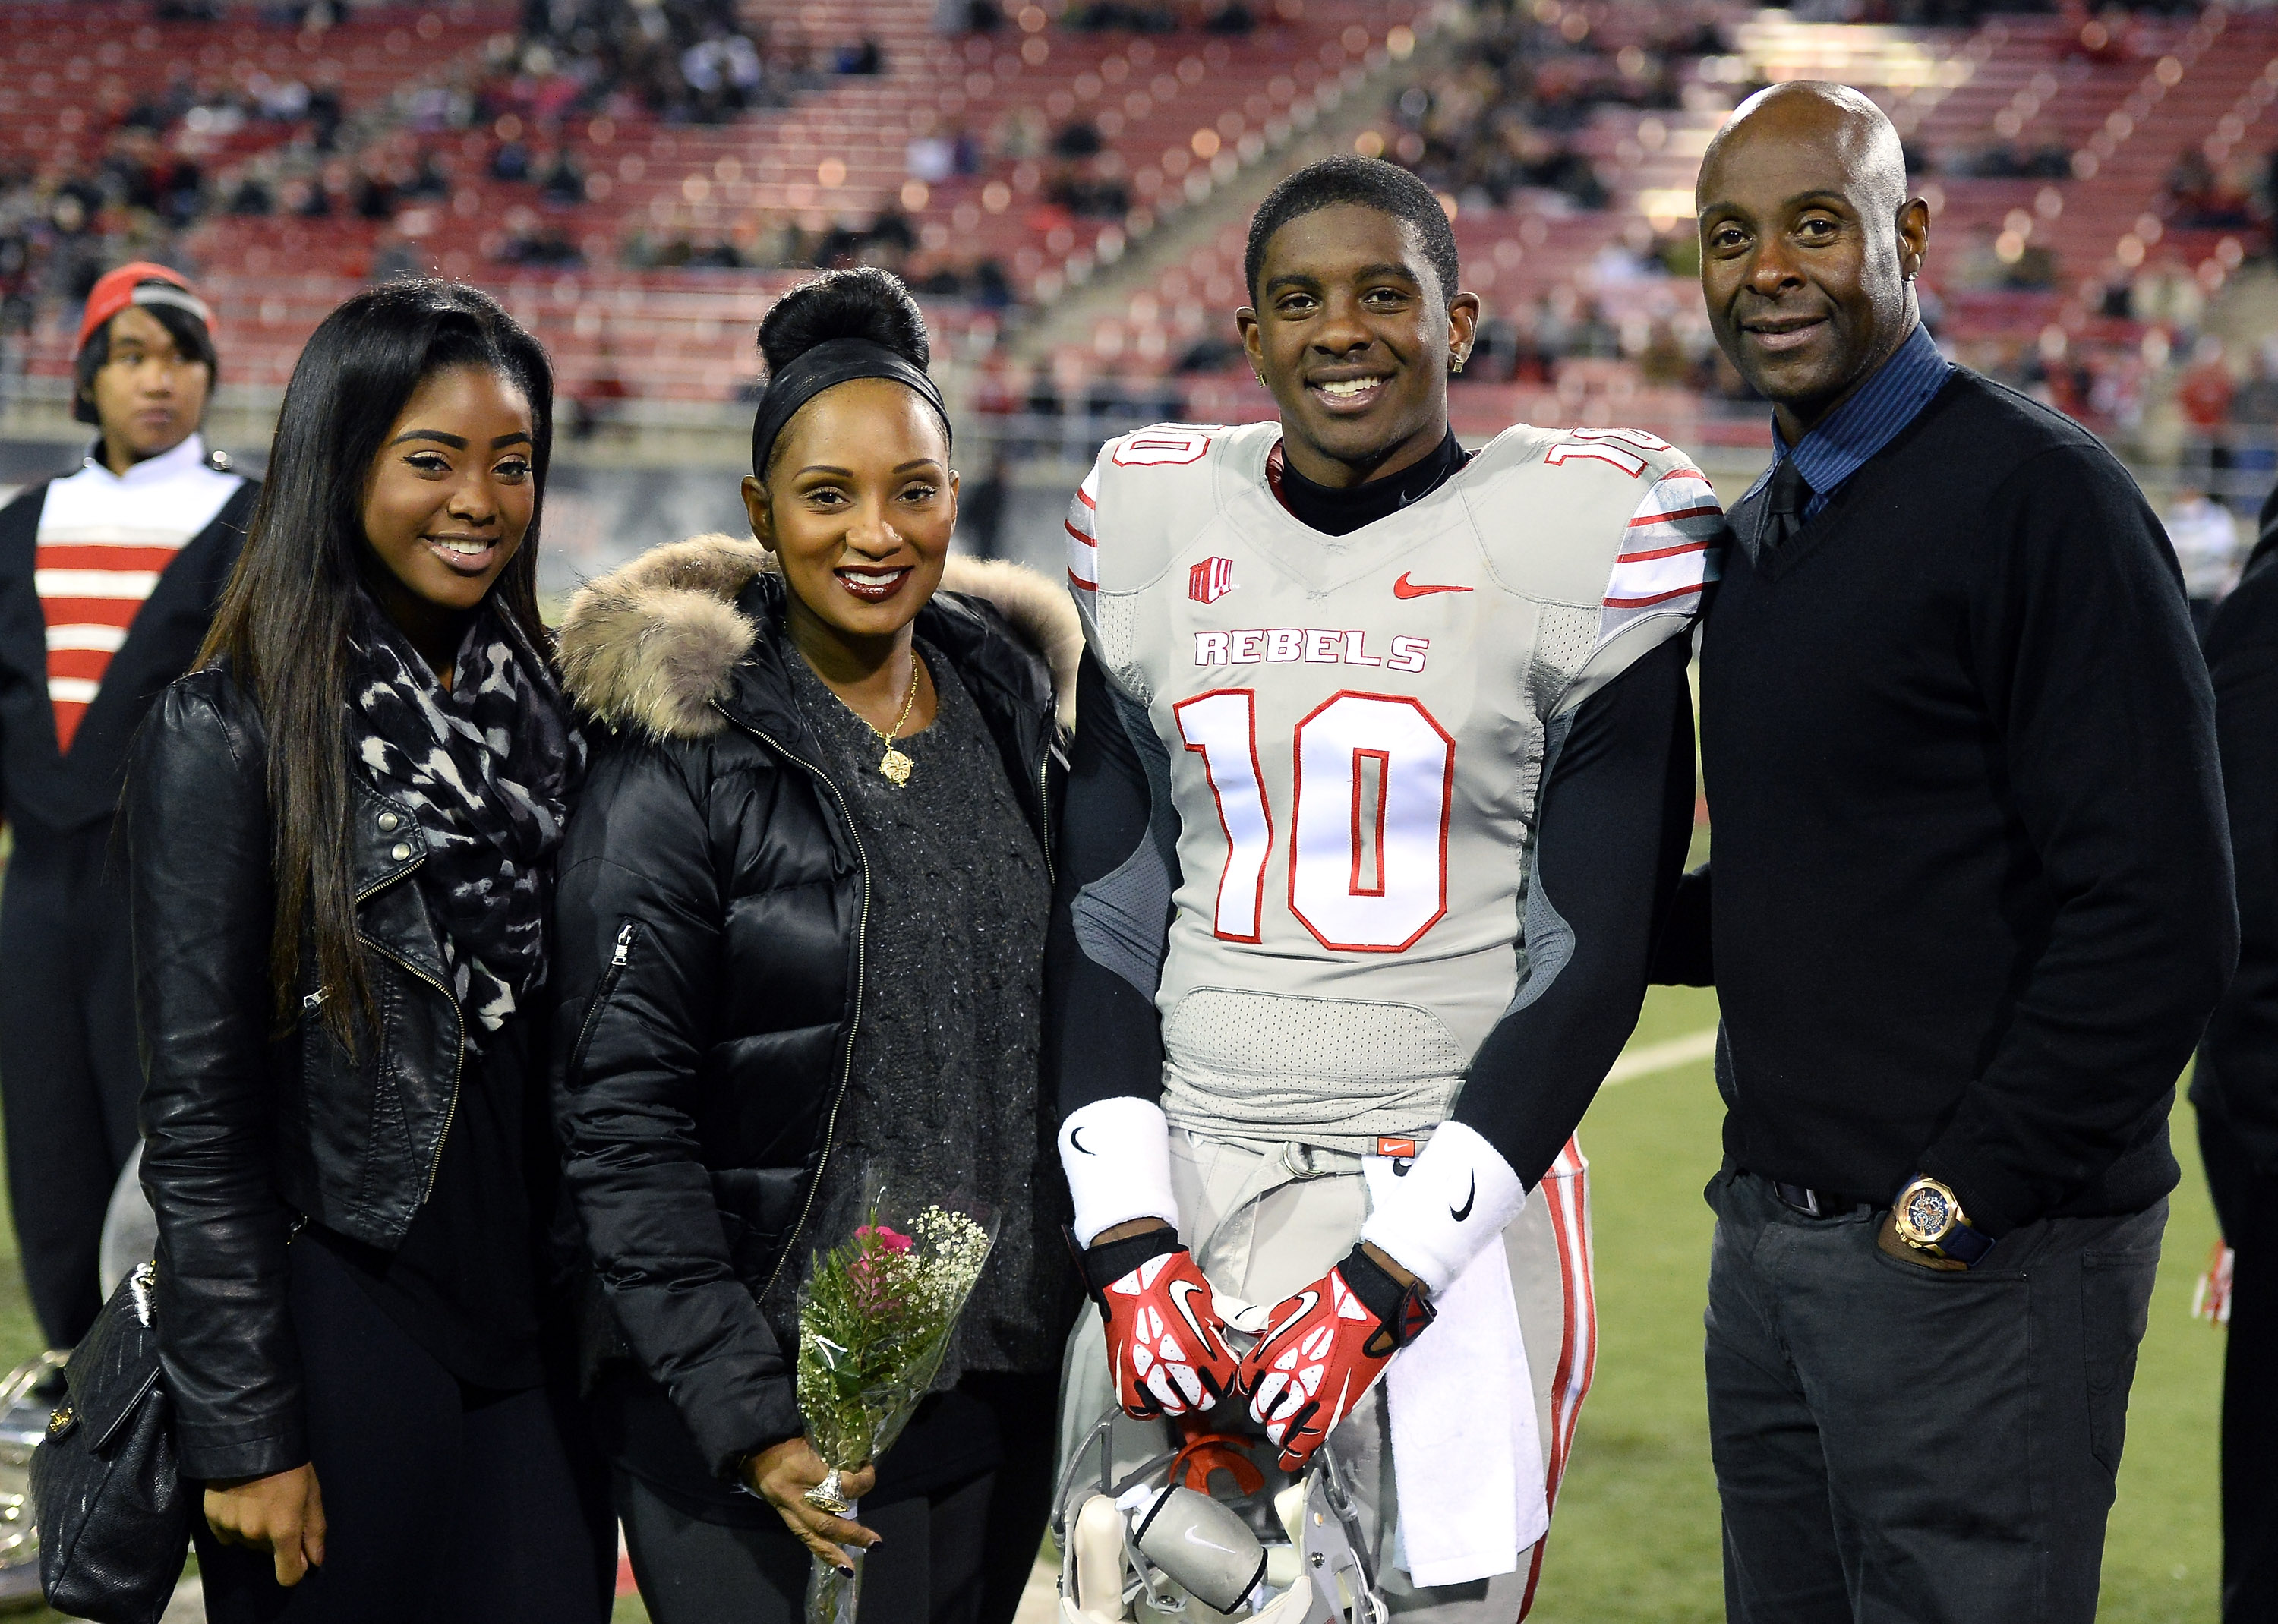 Jerry Rice, his ex-wife Jacqueline Bernice Mitchell and their children  at Sam Boyd Stadium on November 30, 2013 in Las Vegas, Nevada. | Source: Getty Images